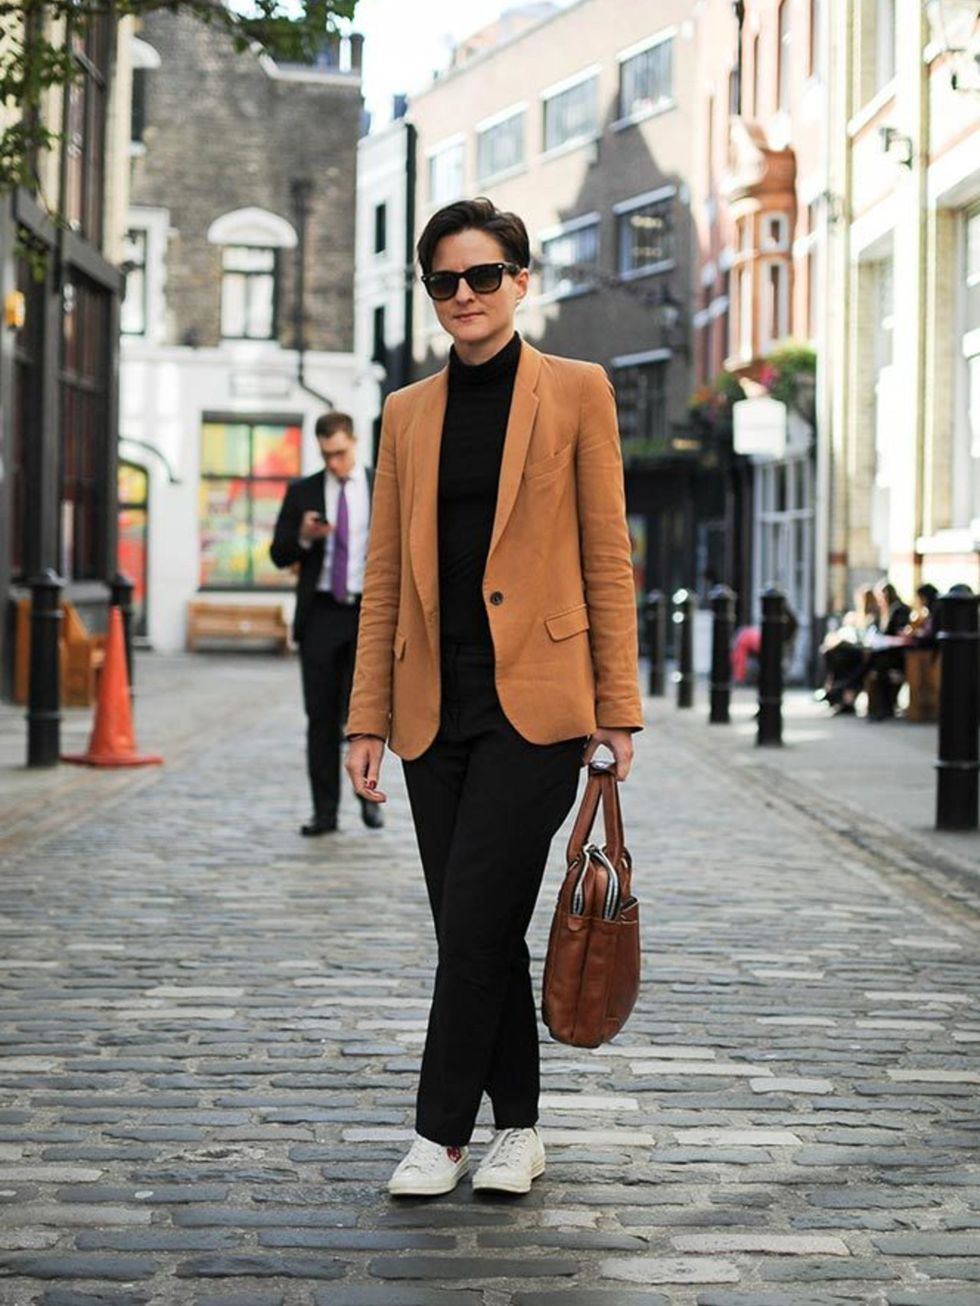 Lotte Jeffs , Deputy Editor
Zara blazer, Topshop poloneck, Phillip Lim trousers, Comme Des Garcons shoes,, Ray Ban sunglasses, briefcase from a shop in Antwerp